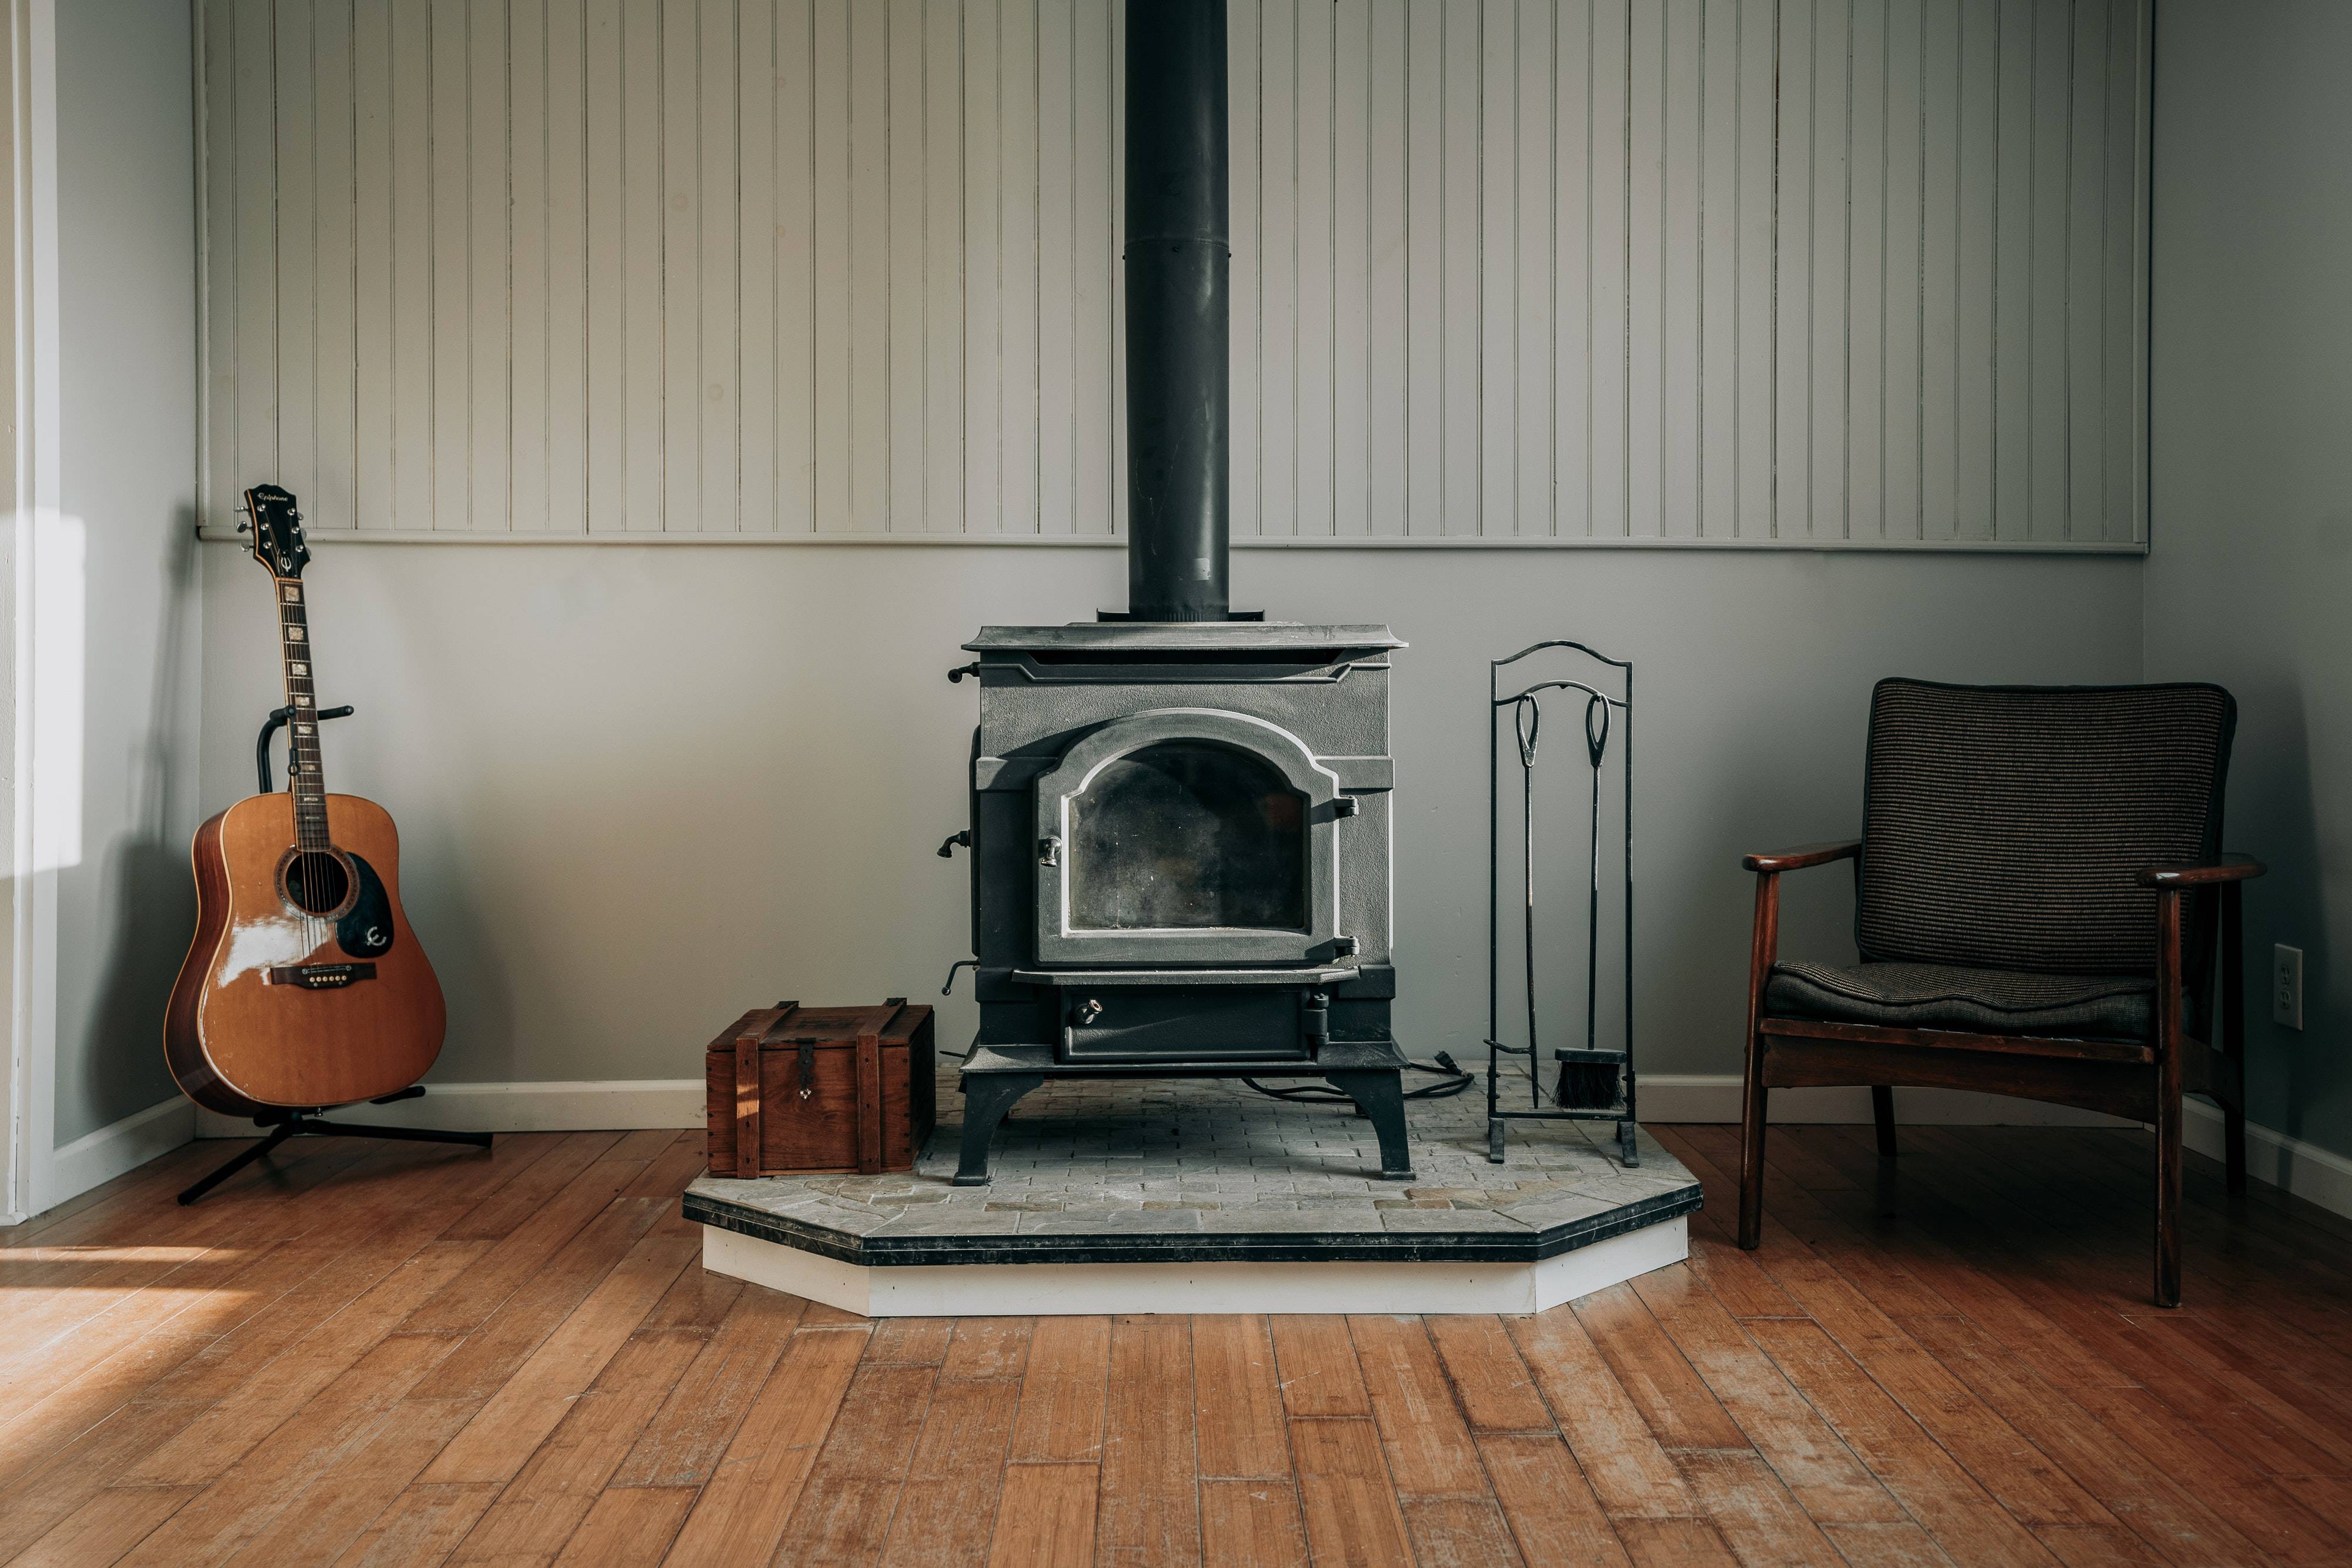 Old fireplace in old house between guitar and chair